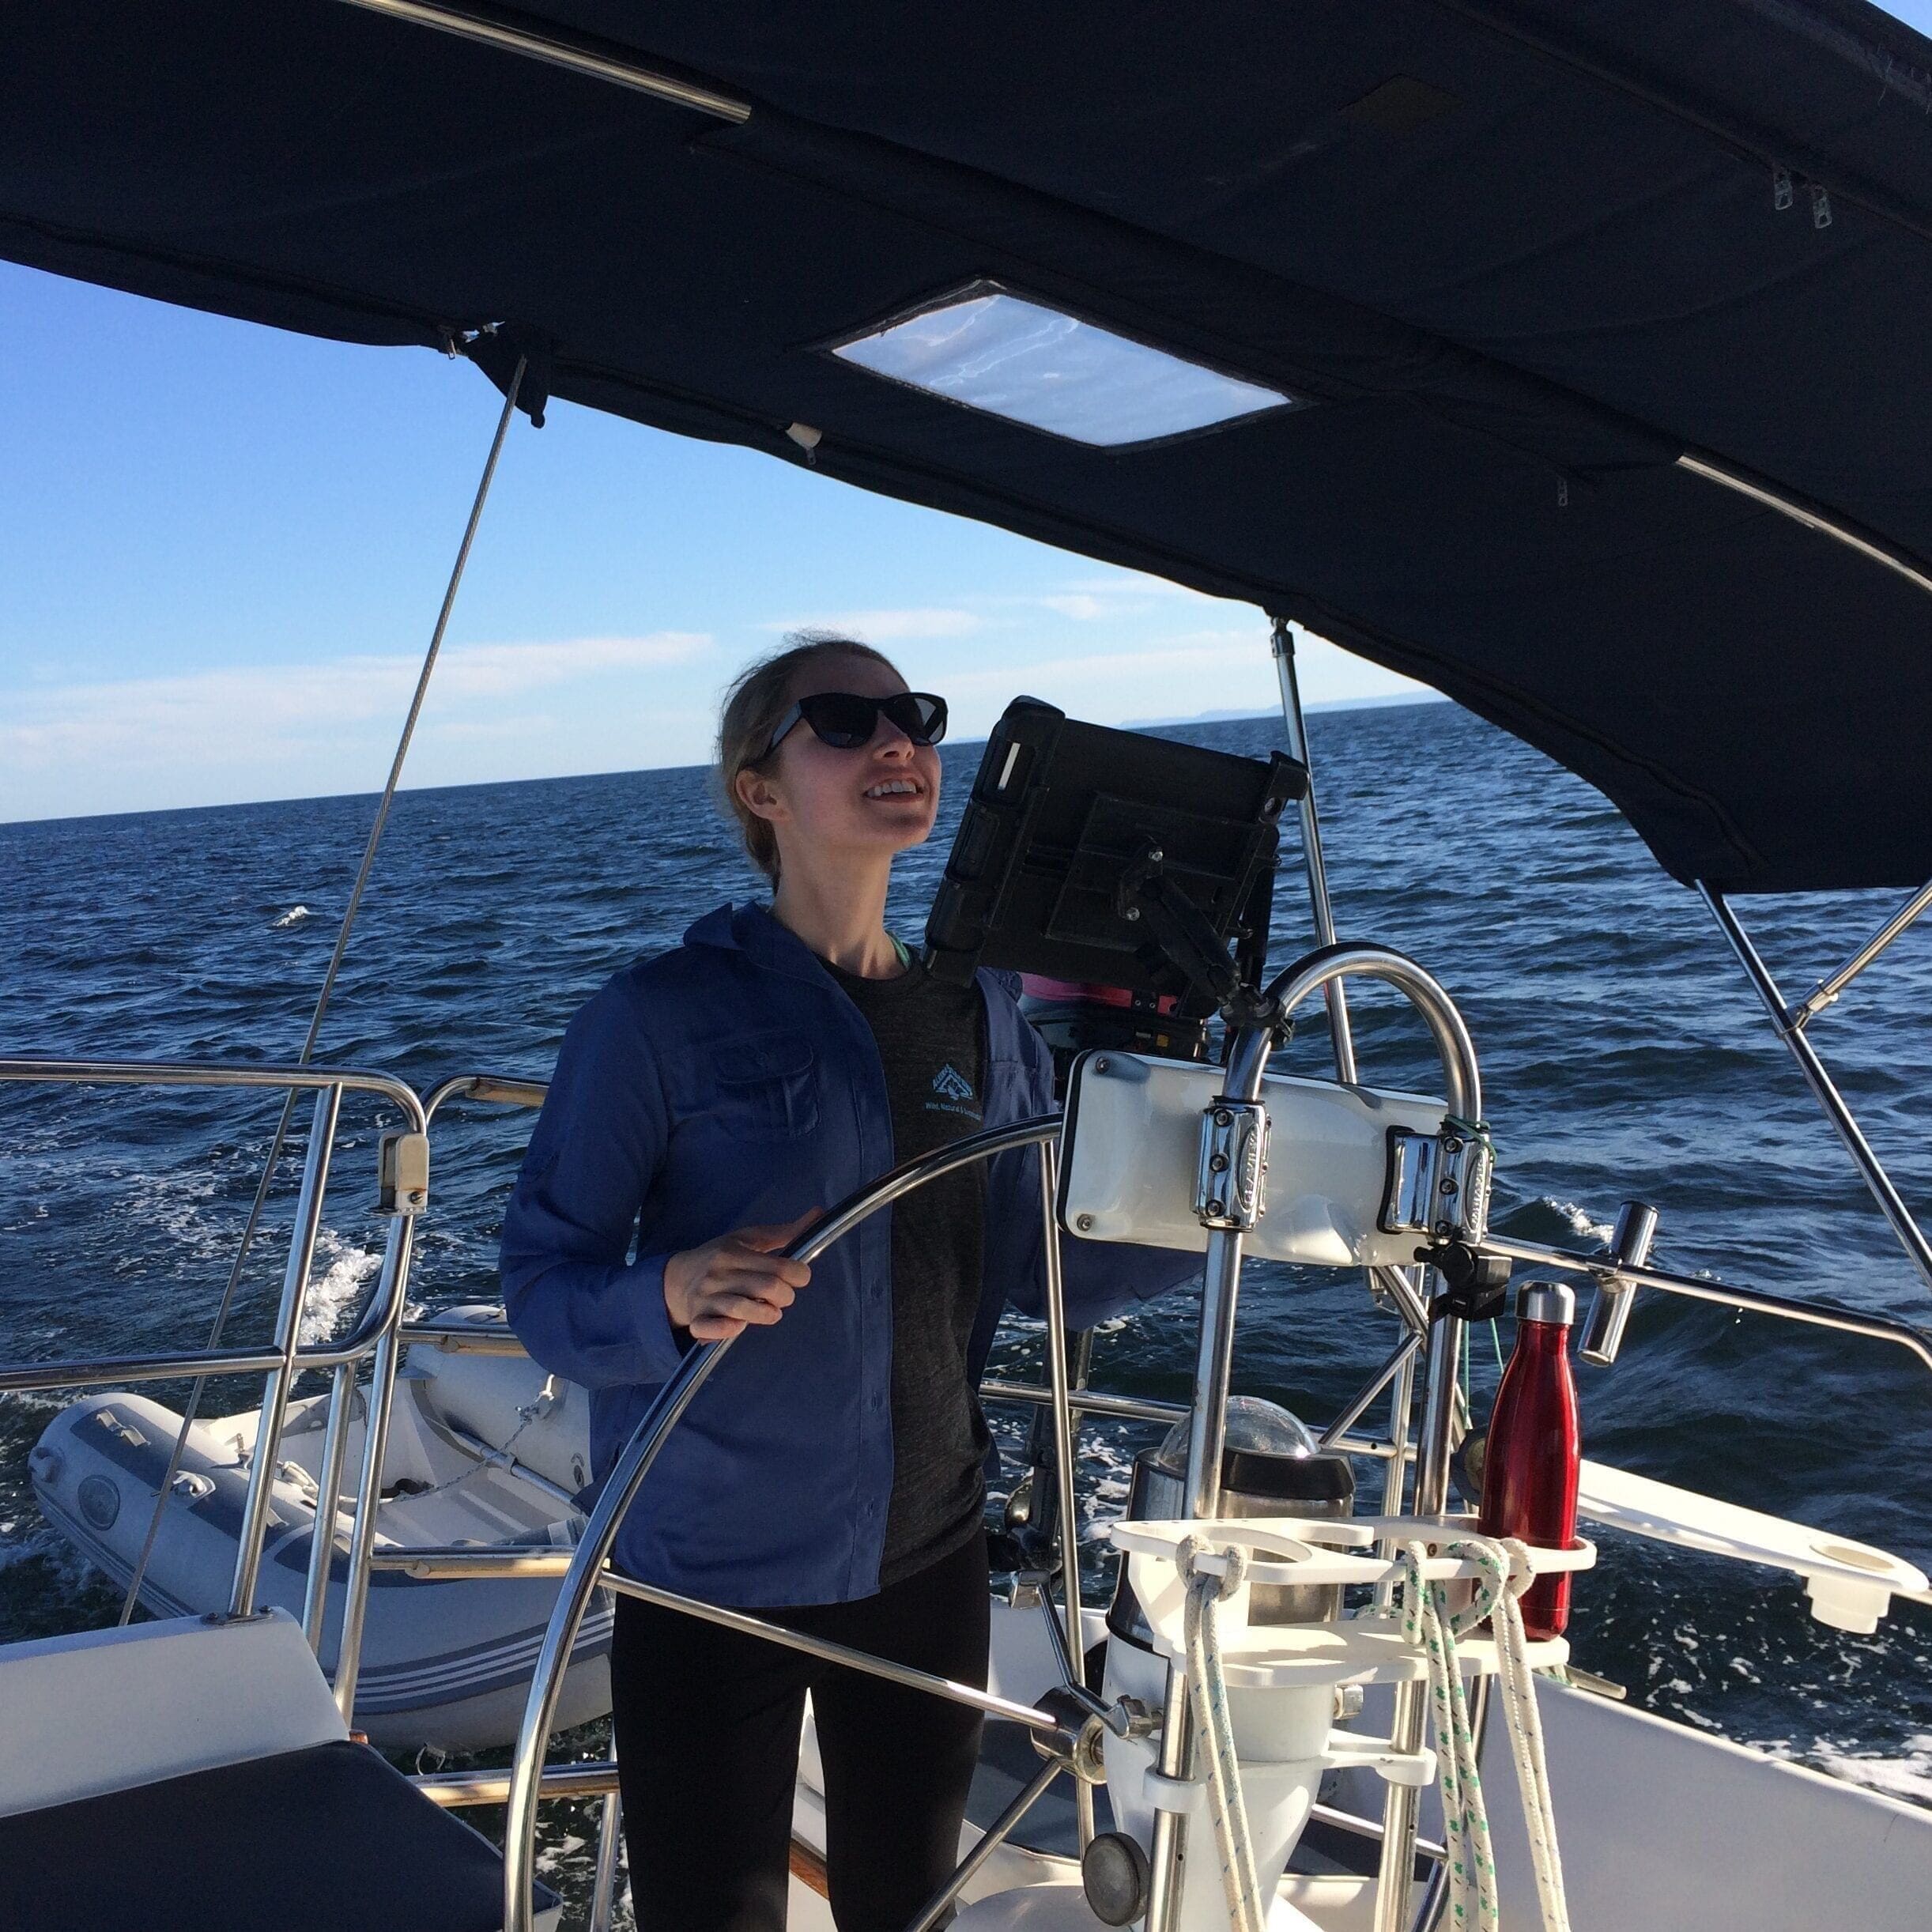 Delaney at the helm of a sailboat